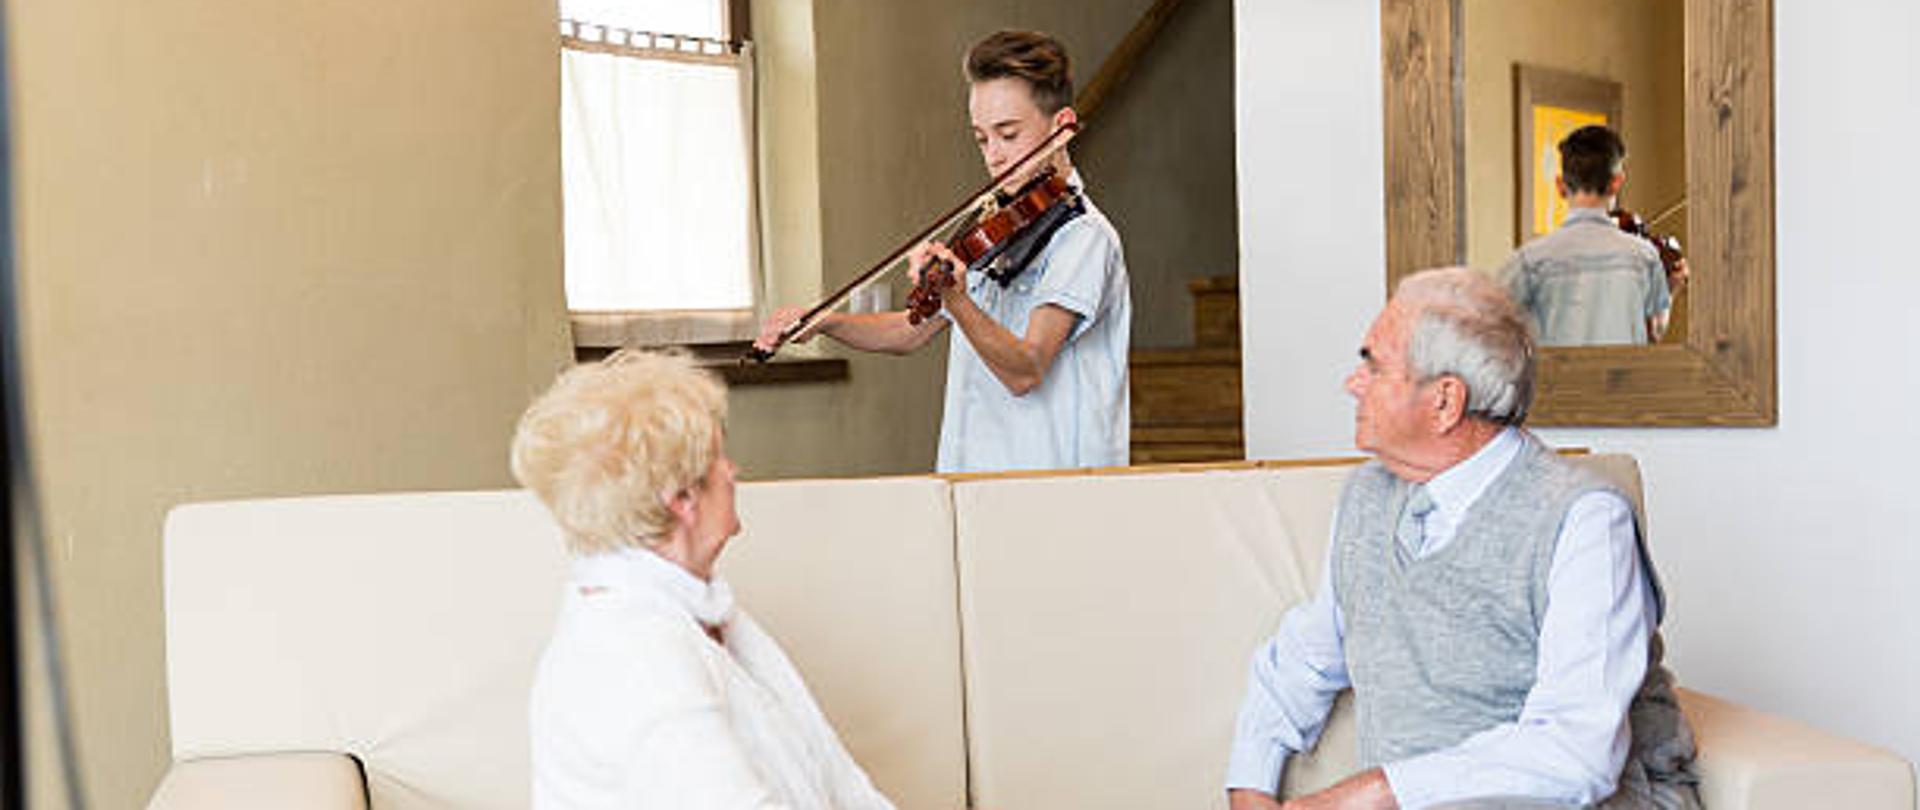 Young boy playing violin to his grandparents.